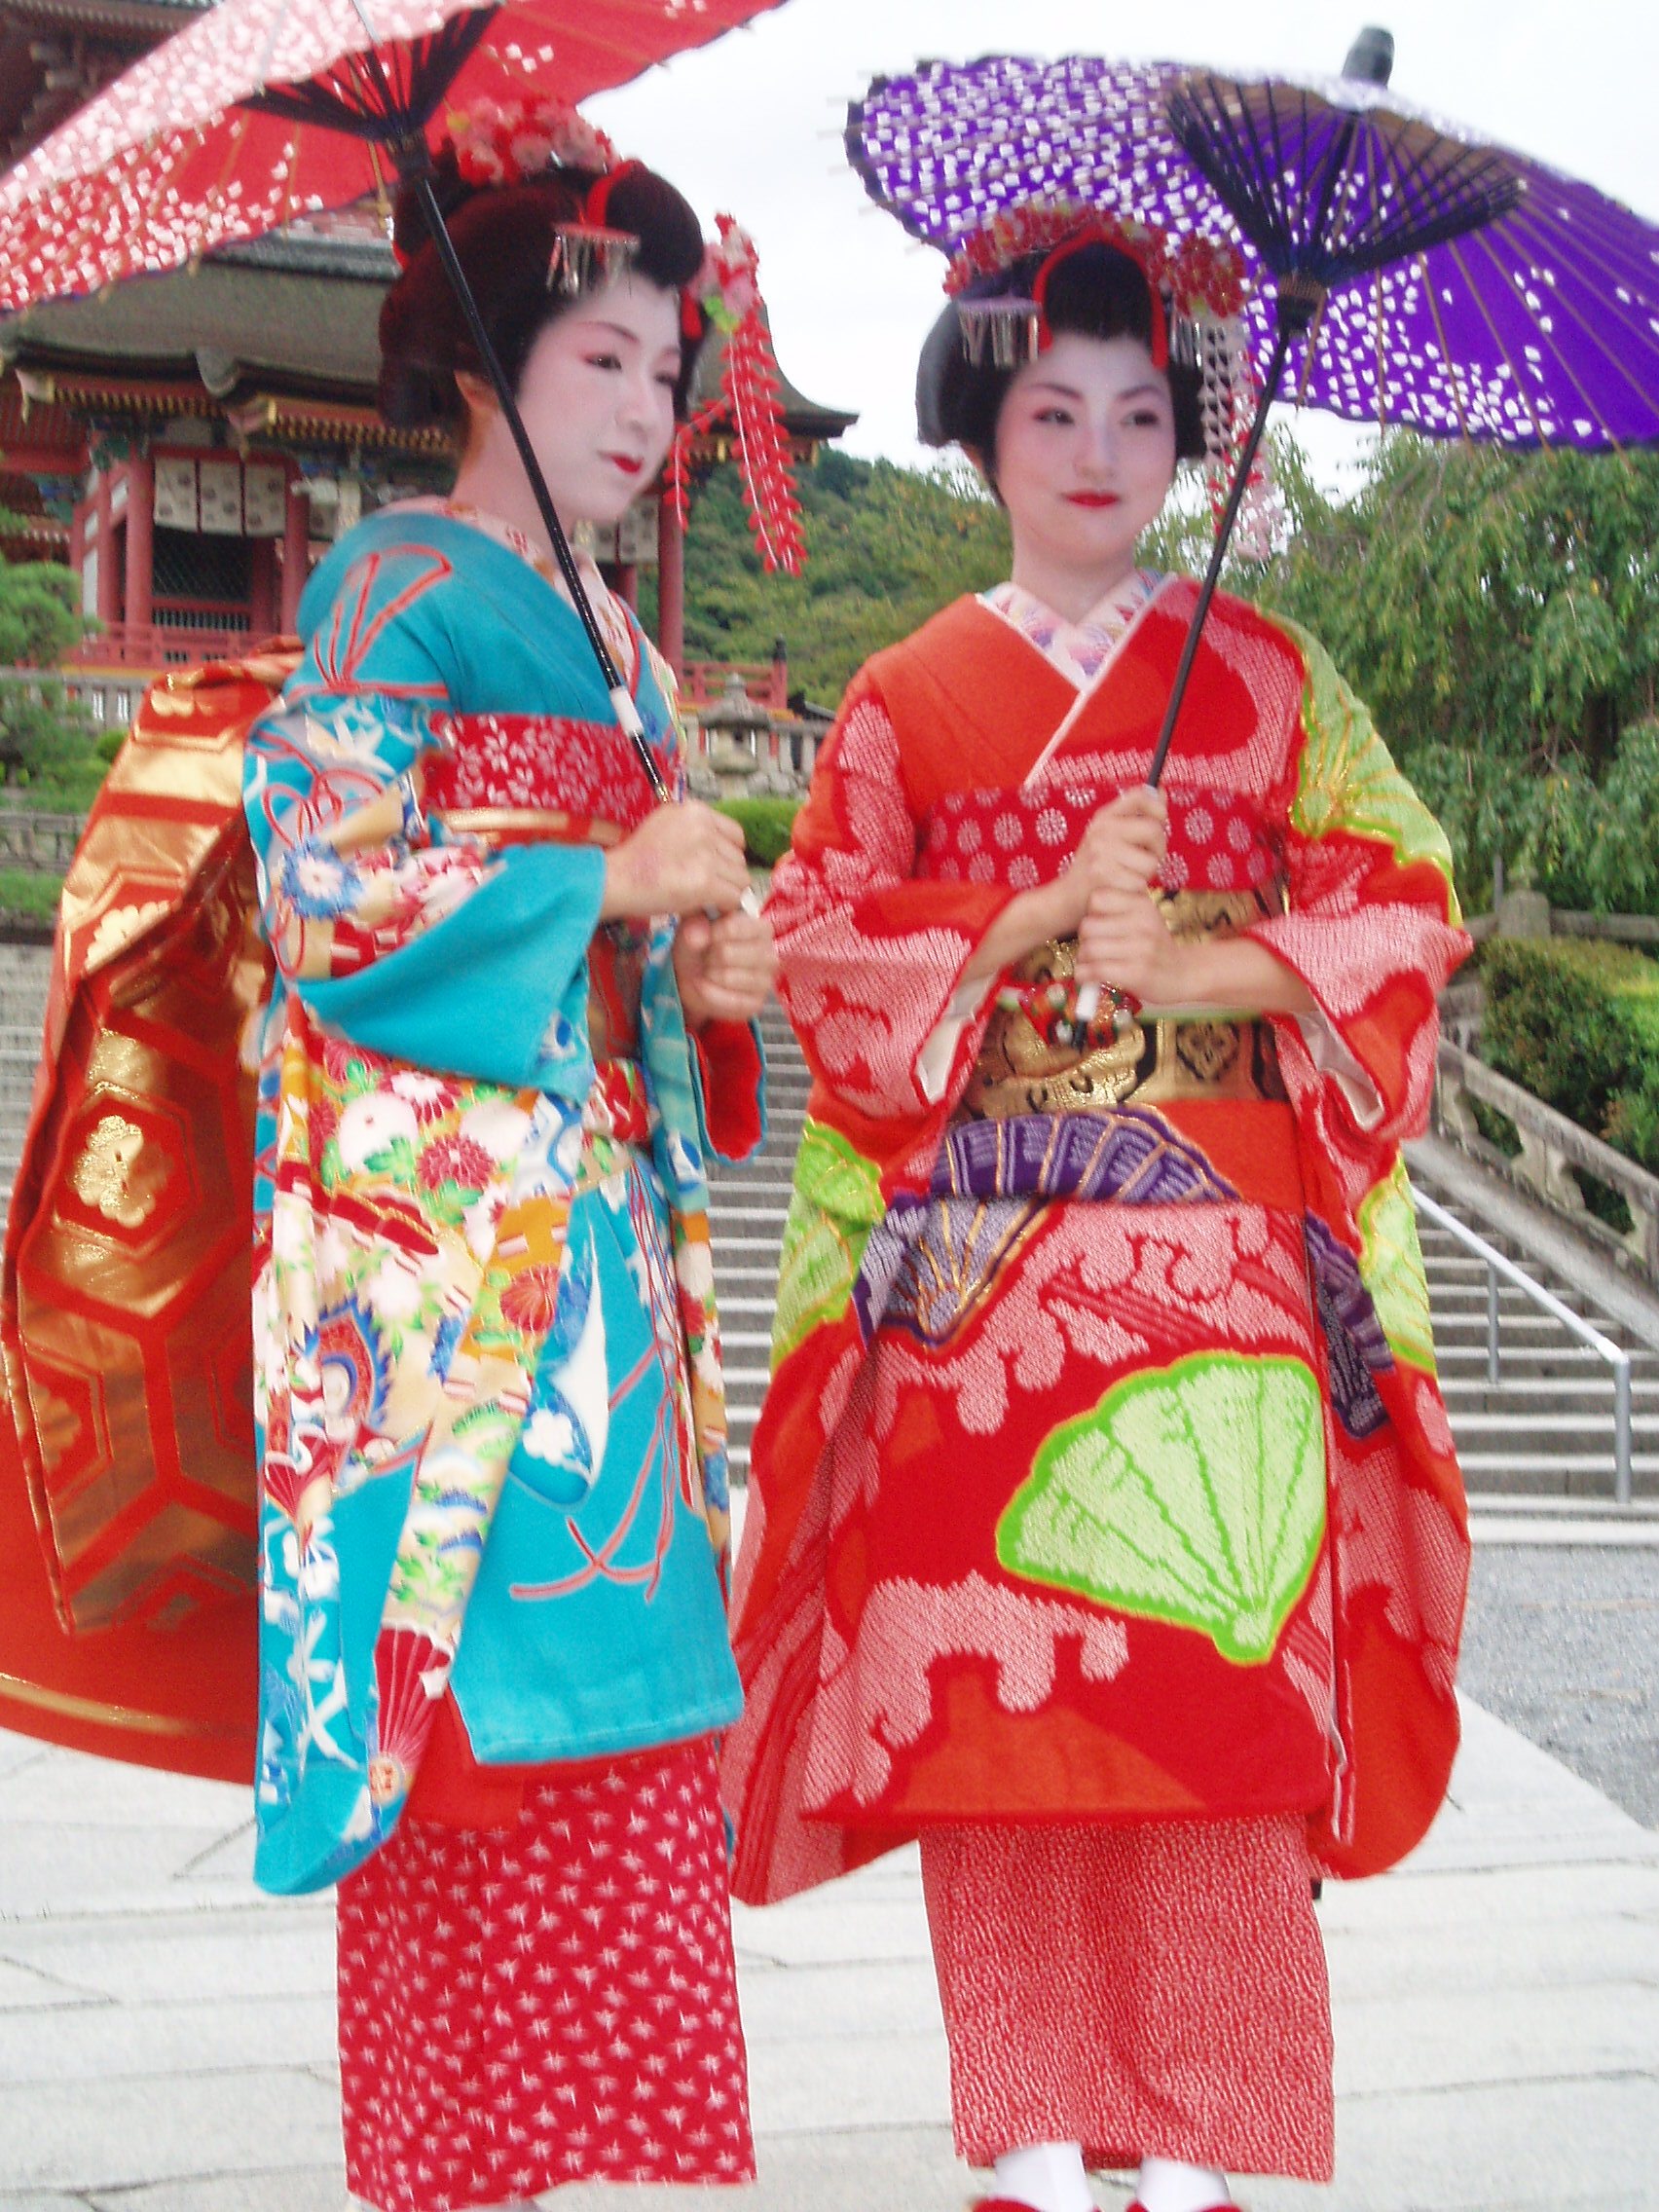 Download this Japanese Traditional Geisha picture